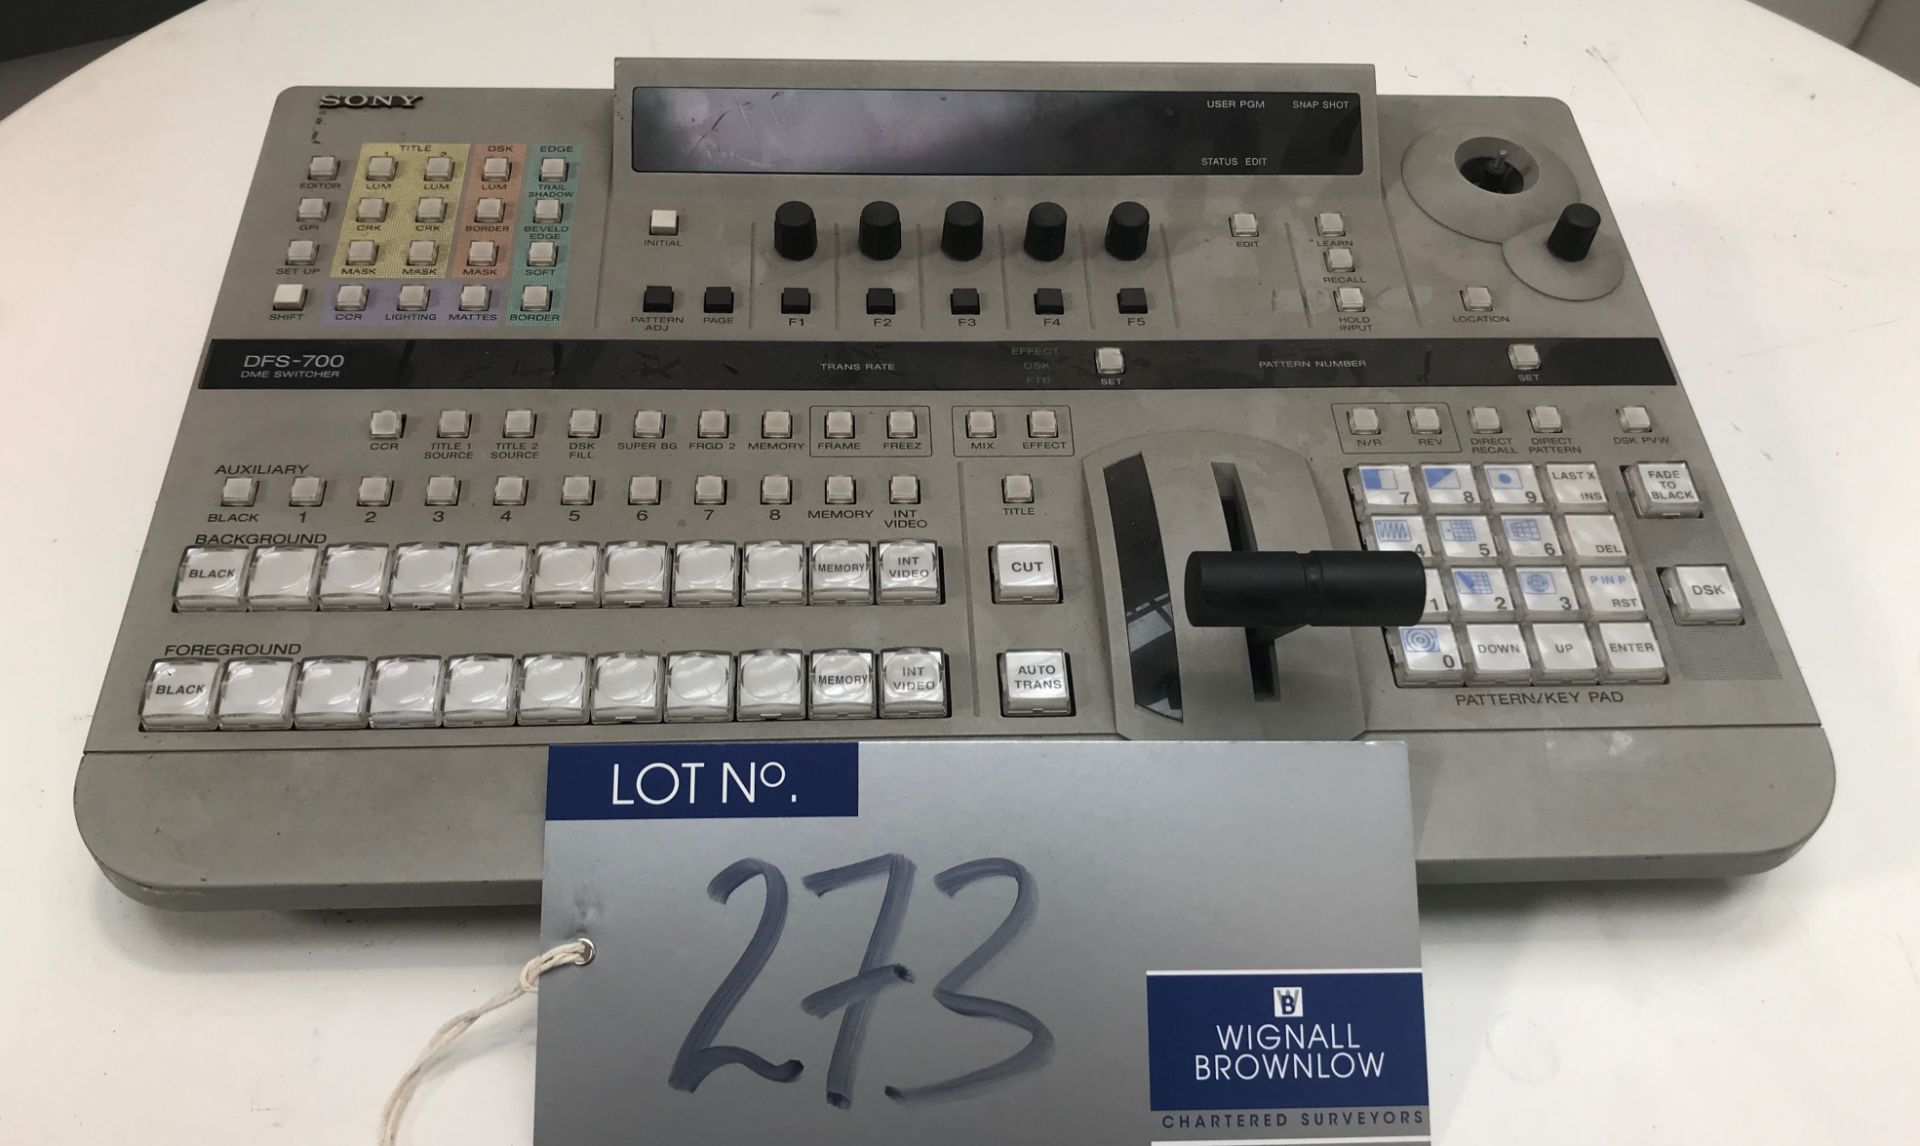 A Sony DFS-7008 DME Switcher with DFS-7001 Controller and Flight Case (located at Unit 54 - Image 2 of 2